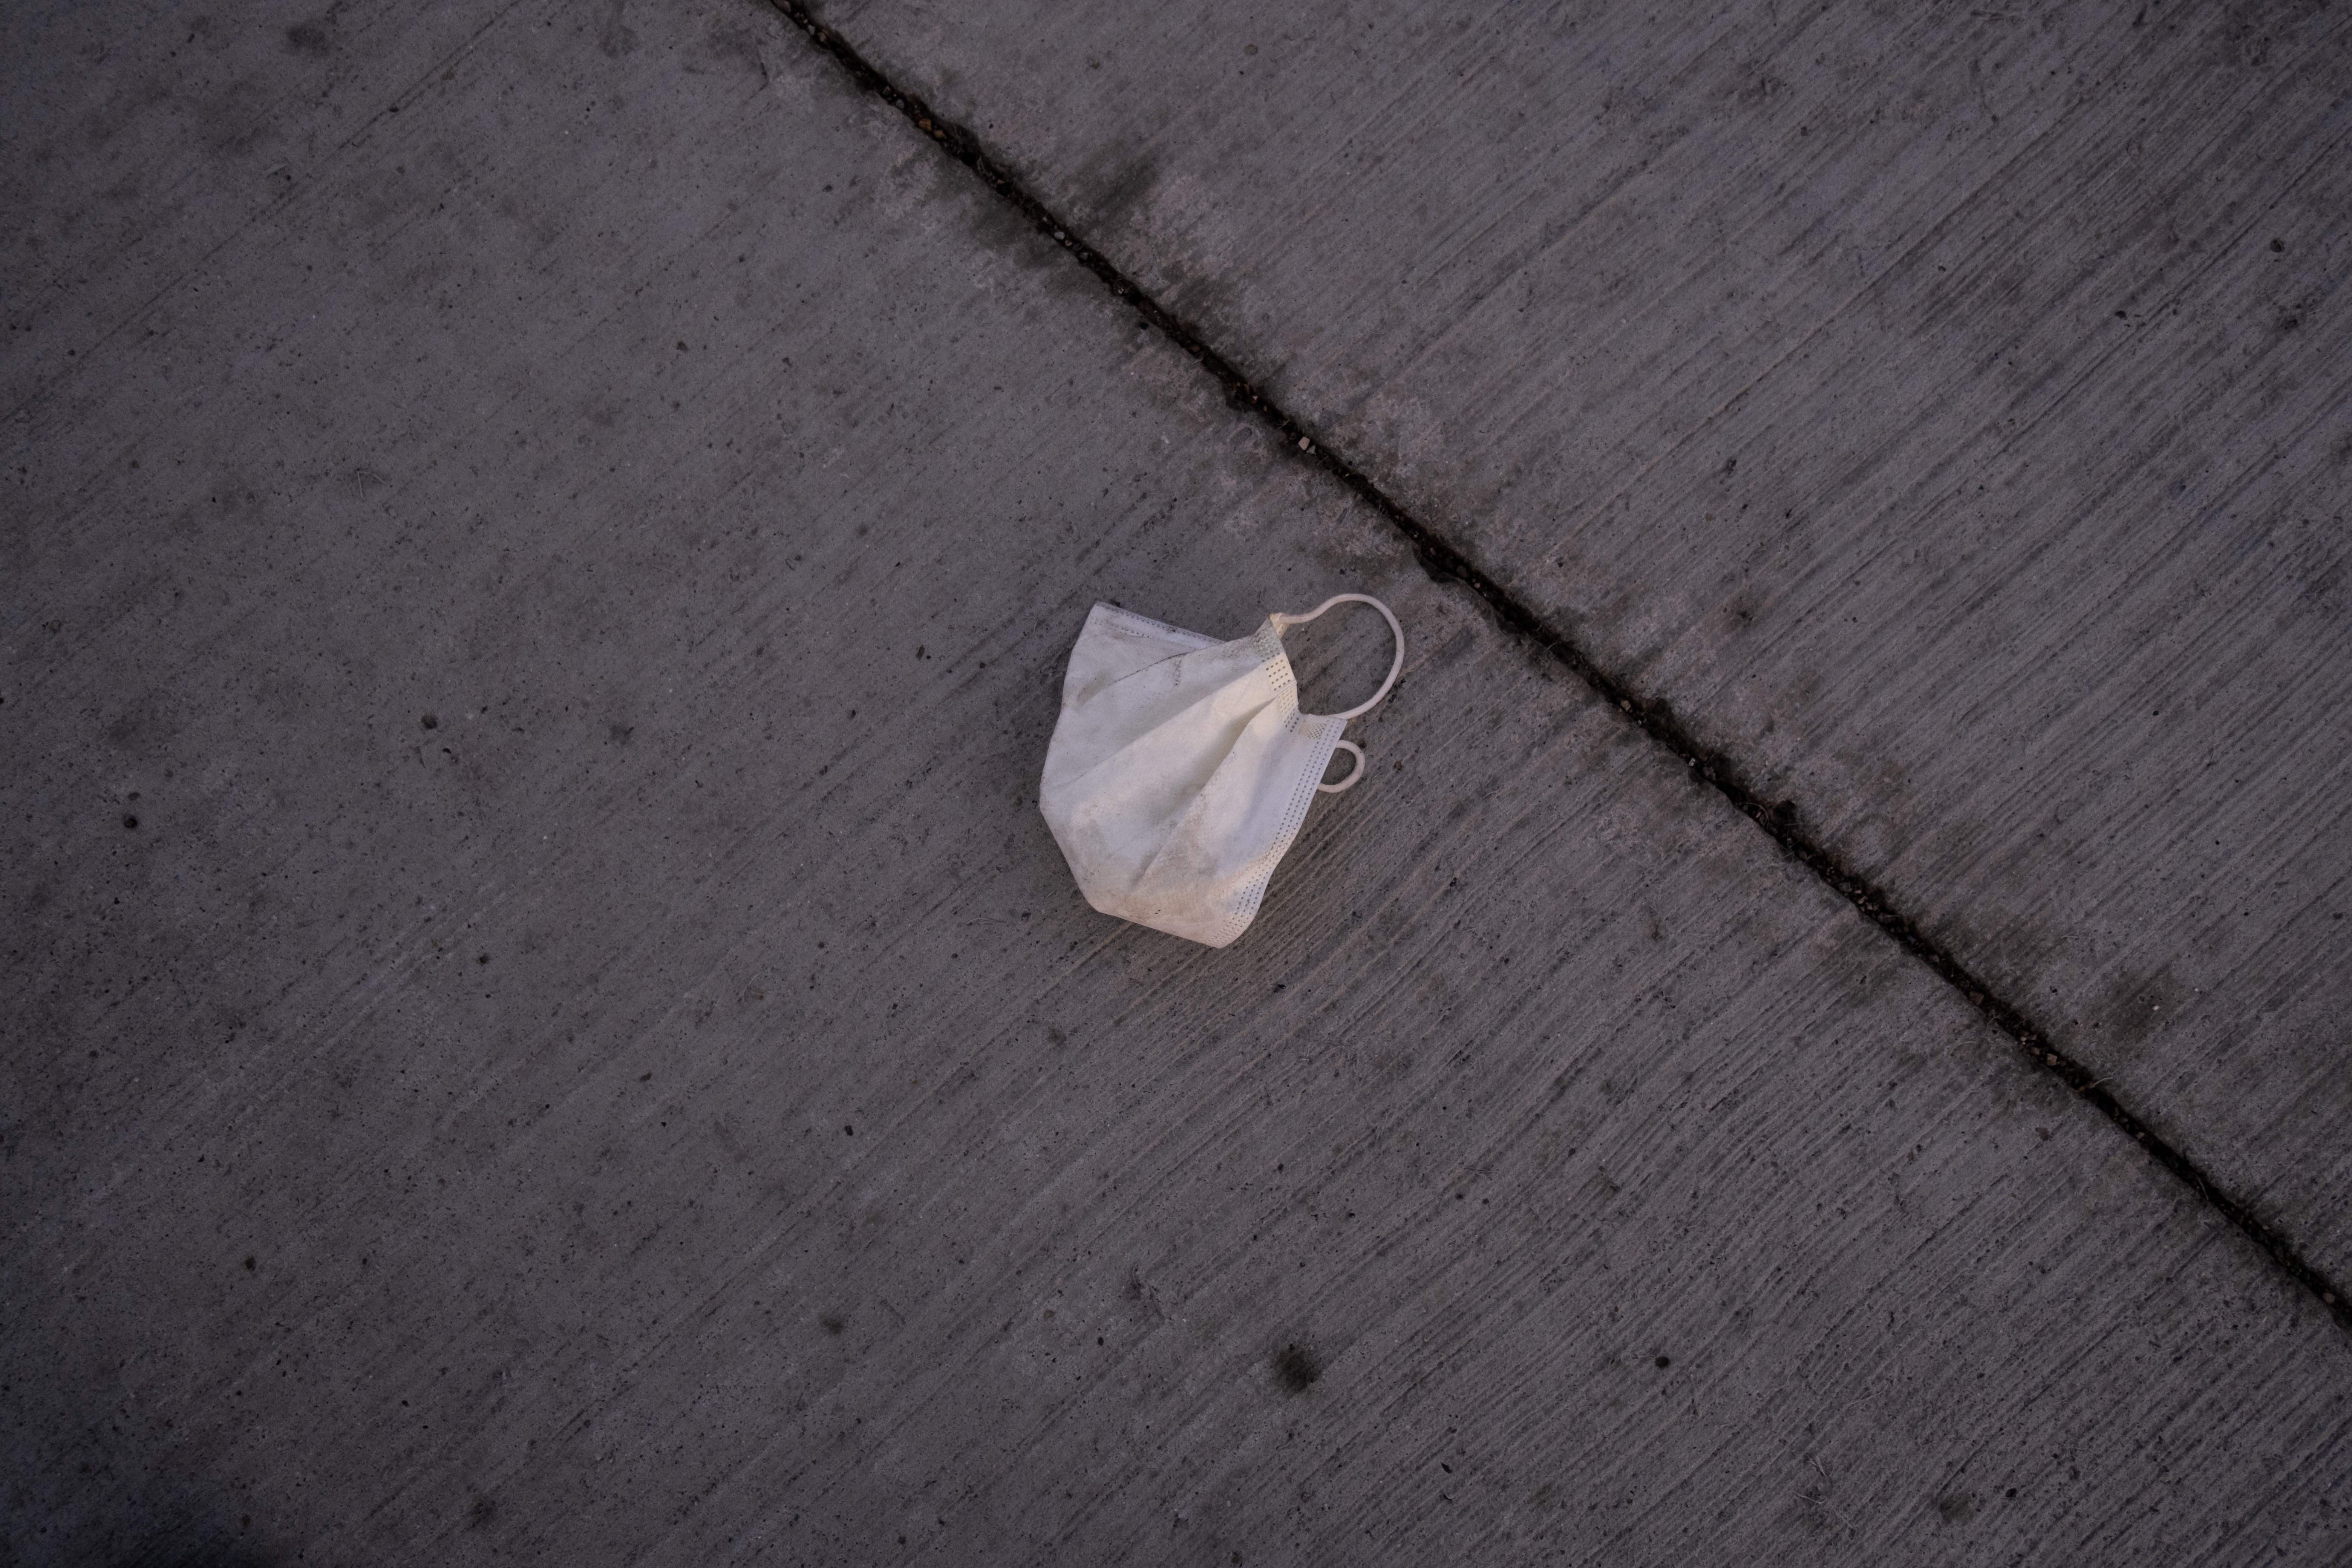 A medical mask is seen on the ground.